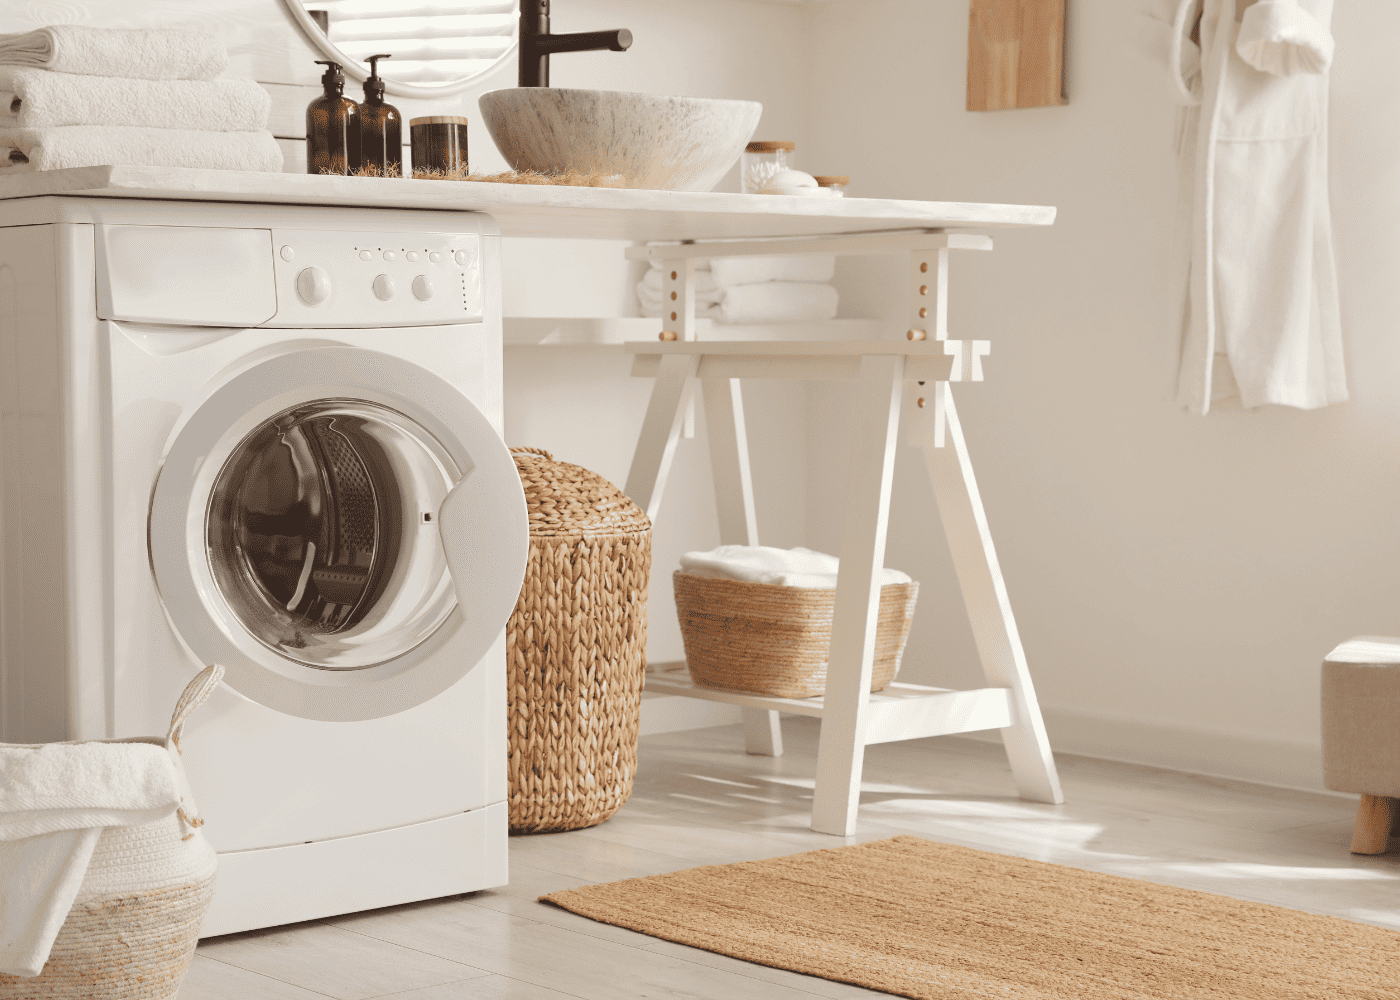 A white laundry room with rattan accents.